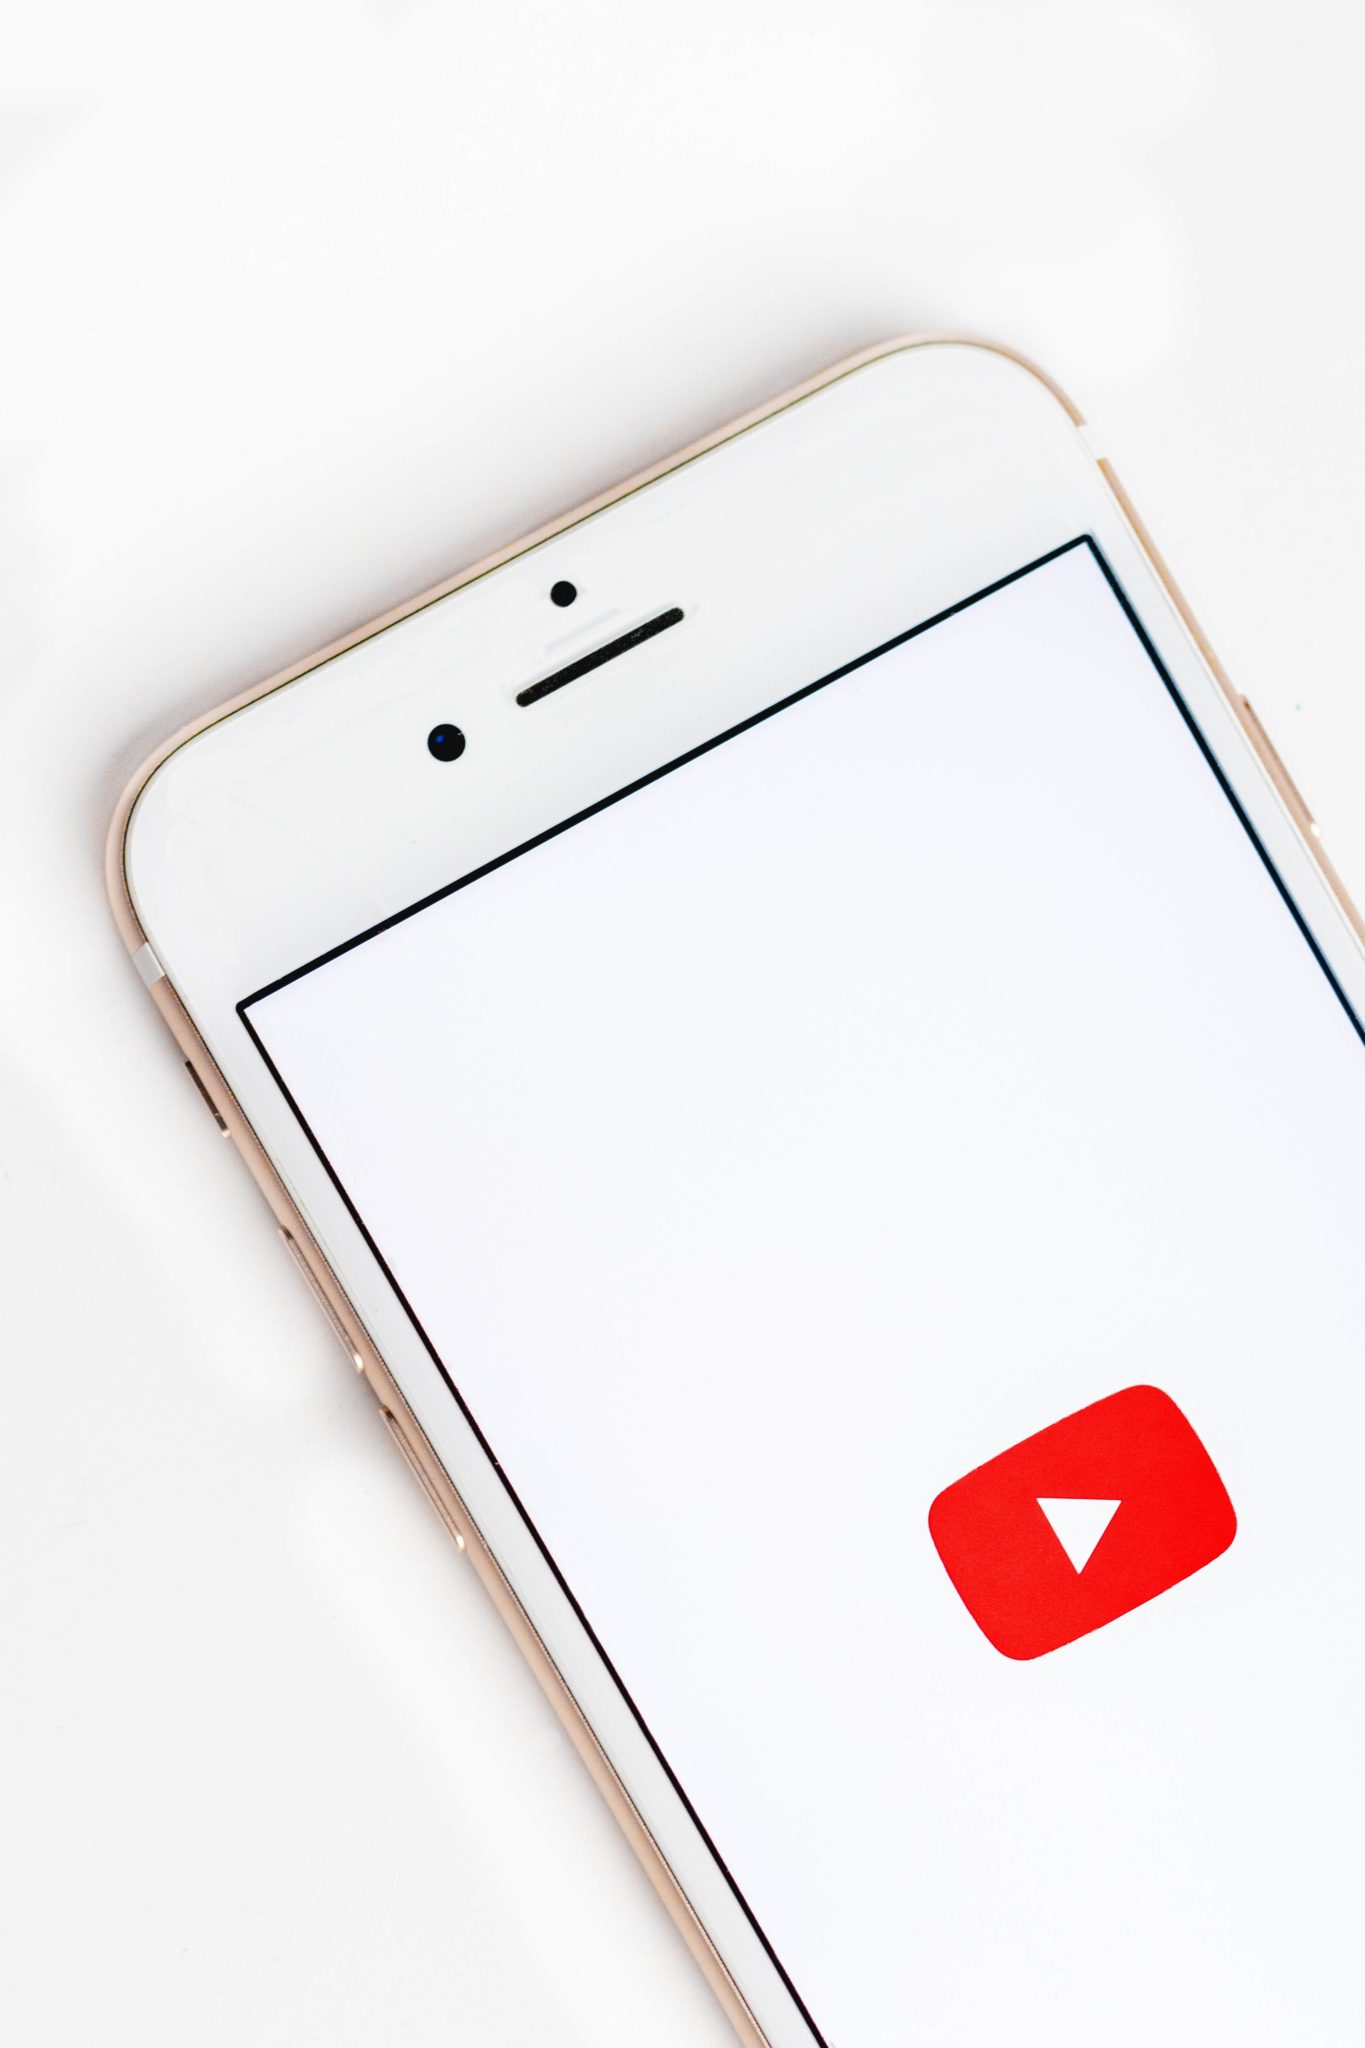 How to Start a Profitable YouTube Channel That People Want to Watch